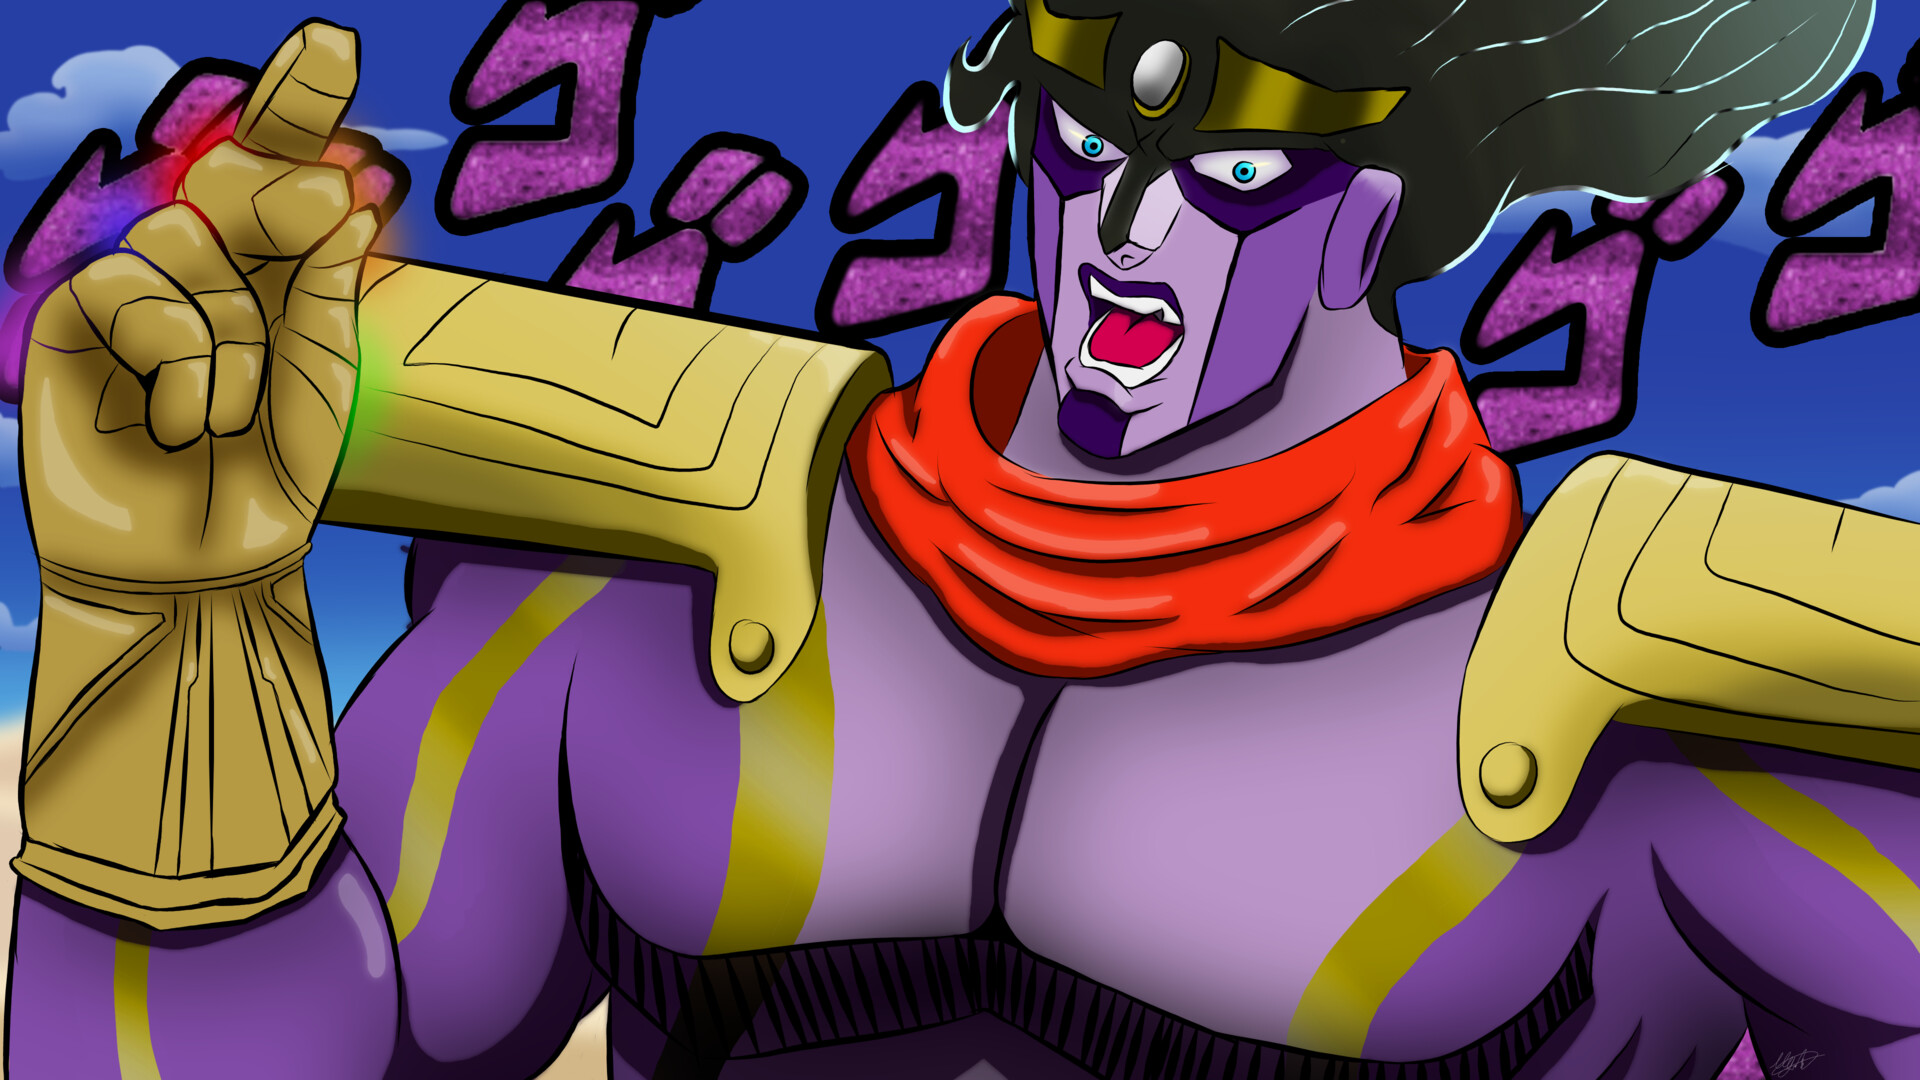 An amazing idea of mixing Star Platinum and the Infinity Gauntlet, I'm...